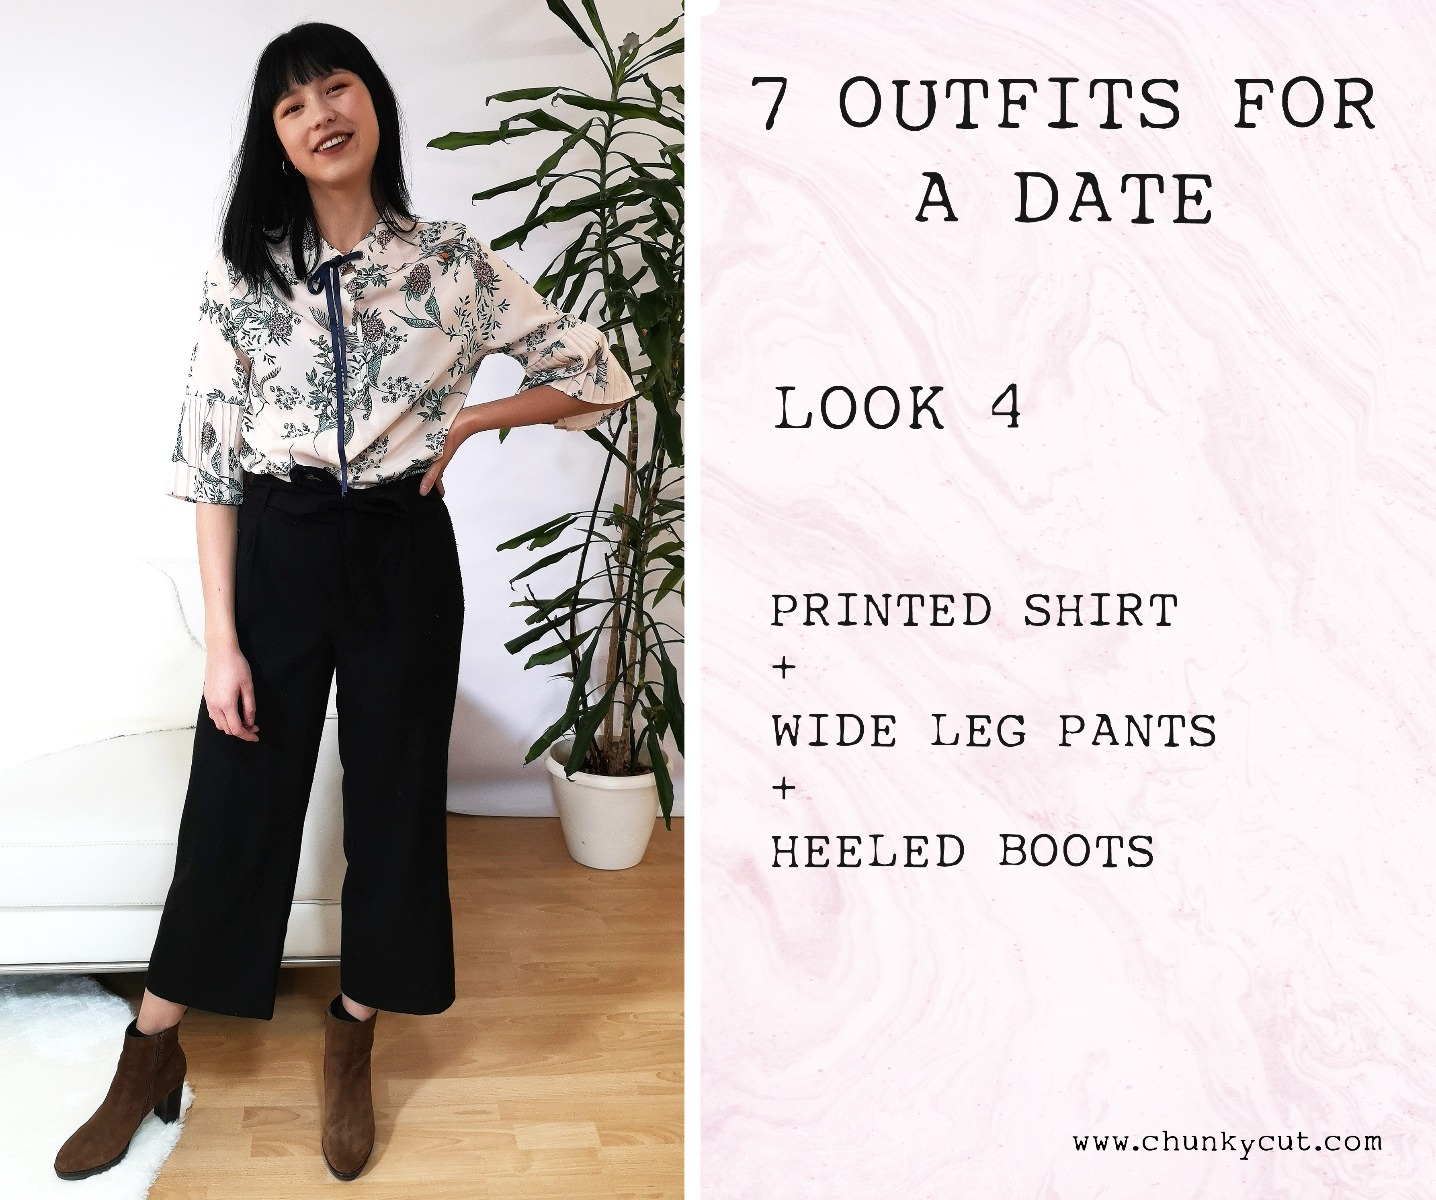 Look 4 with printed shirt, wide leg pants and heeled boots